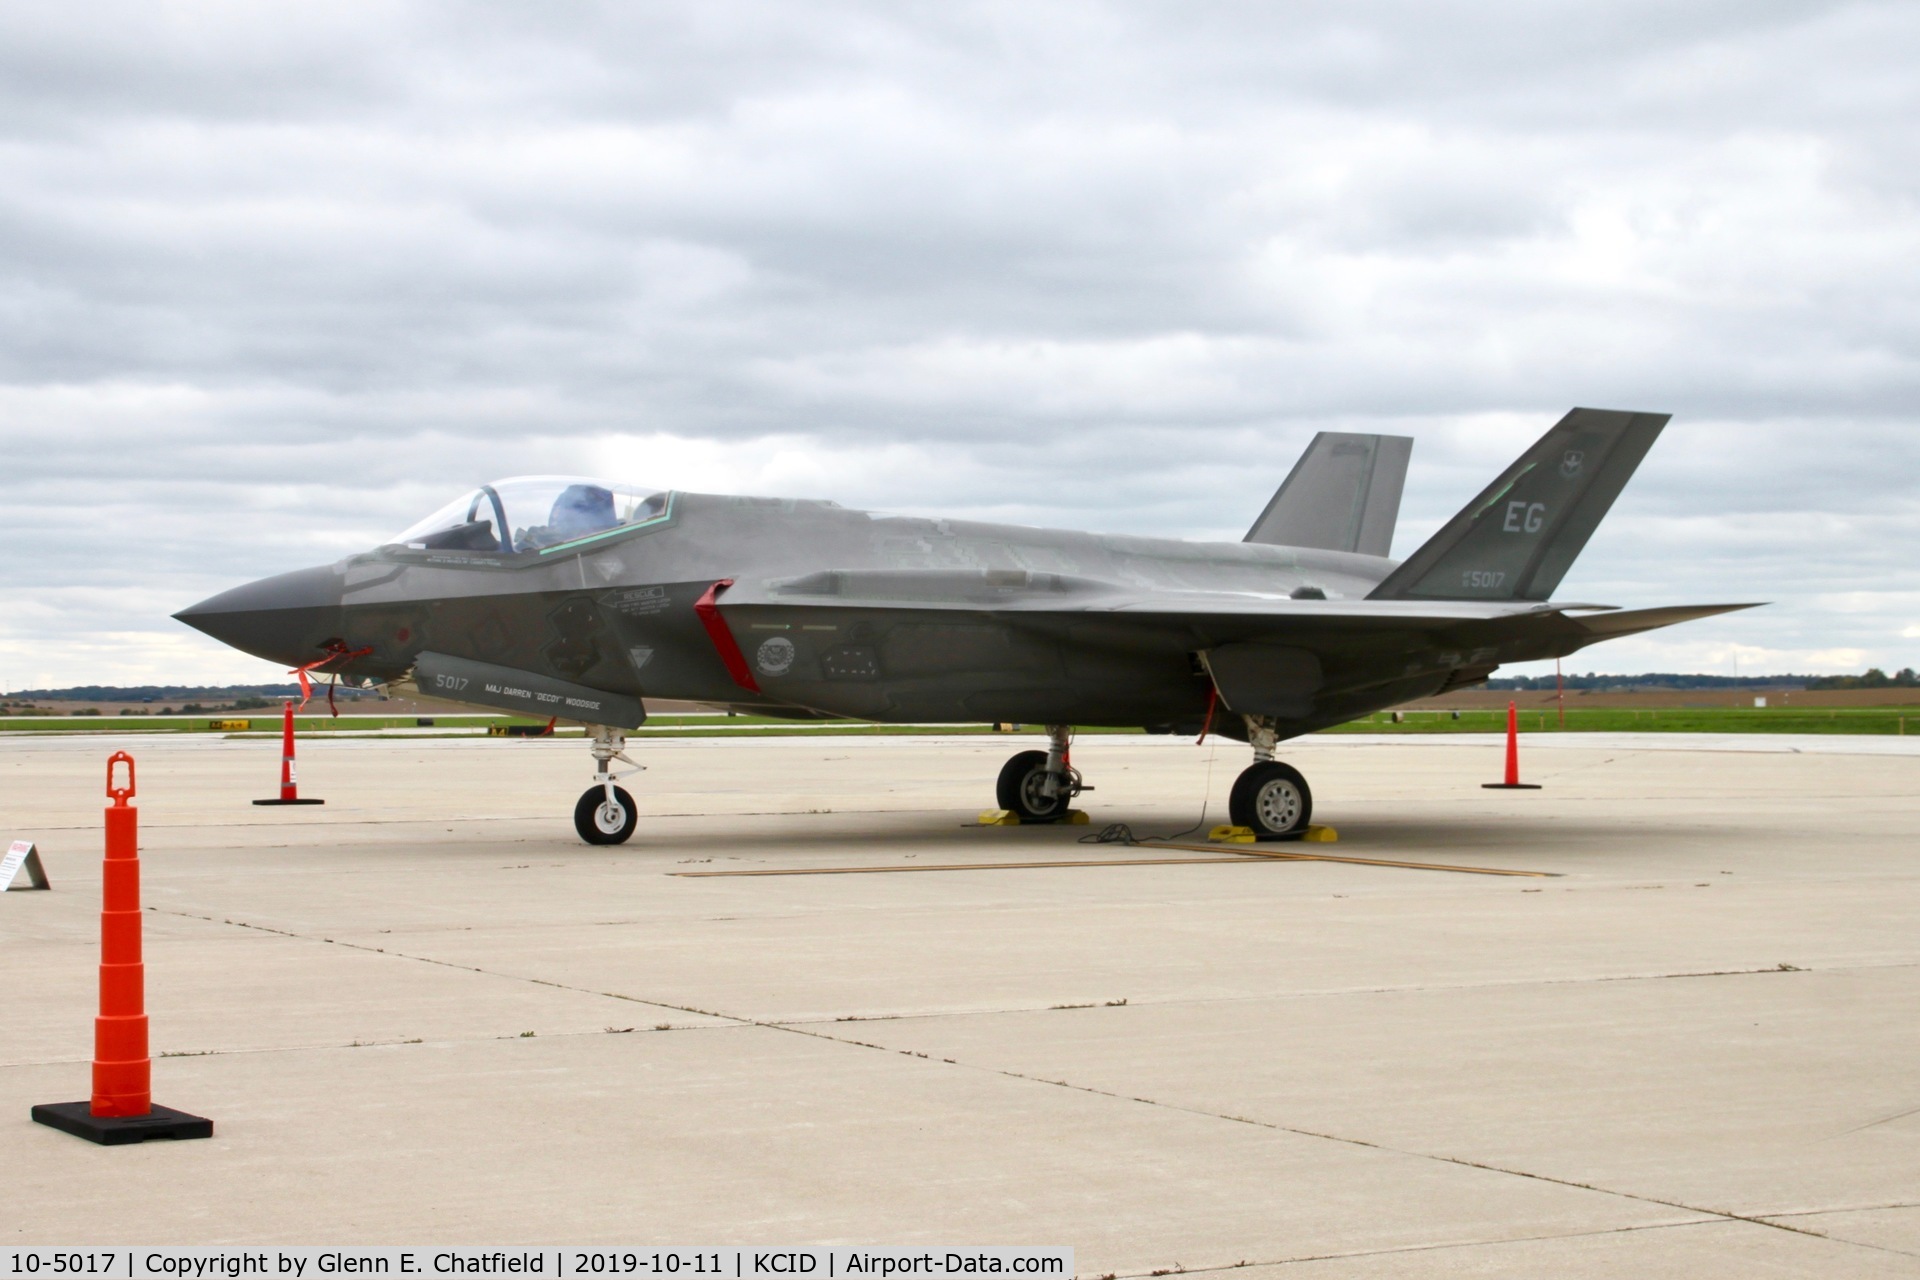 10-5017, 2013 Lockheed Martin F-35A Lightning II C/N AF-29, Photographed from the ramp in front of the control tower